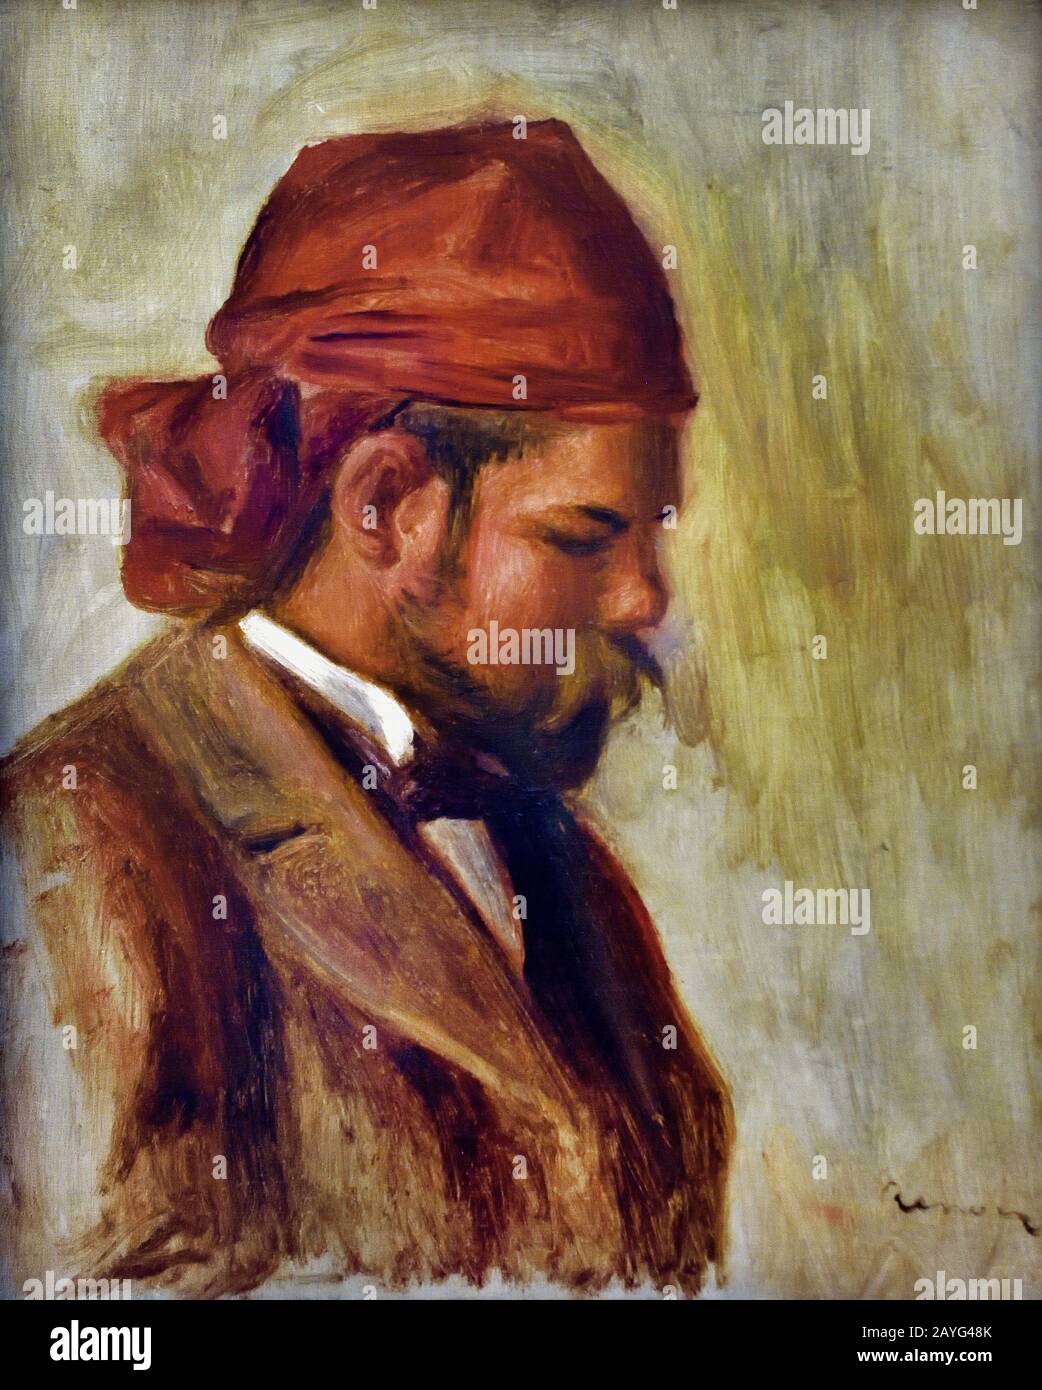 Ambroise Vollard au foulard rouge - Ambroise Vollard with red scarf 1899 by Pierre Auguste Renoir 1841-1919 French Impressionist, France, ( Ambroise Vollard was a French art dealer  ) Stock Photo